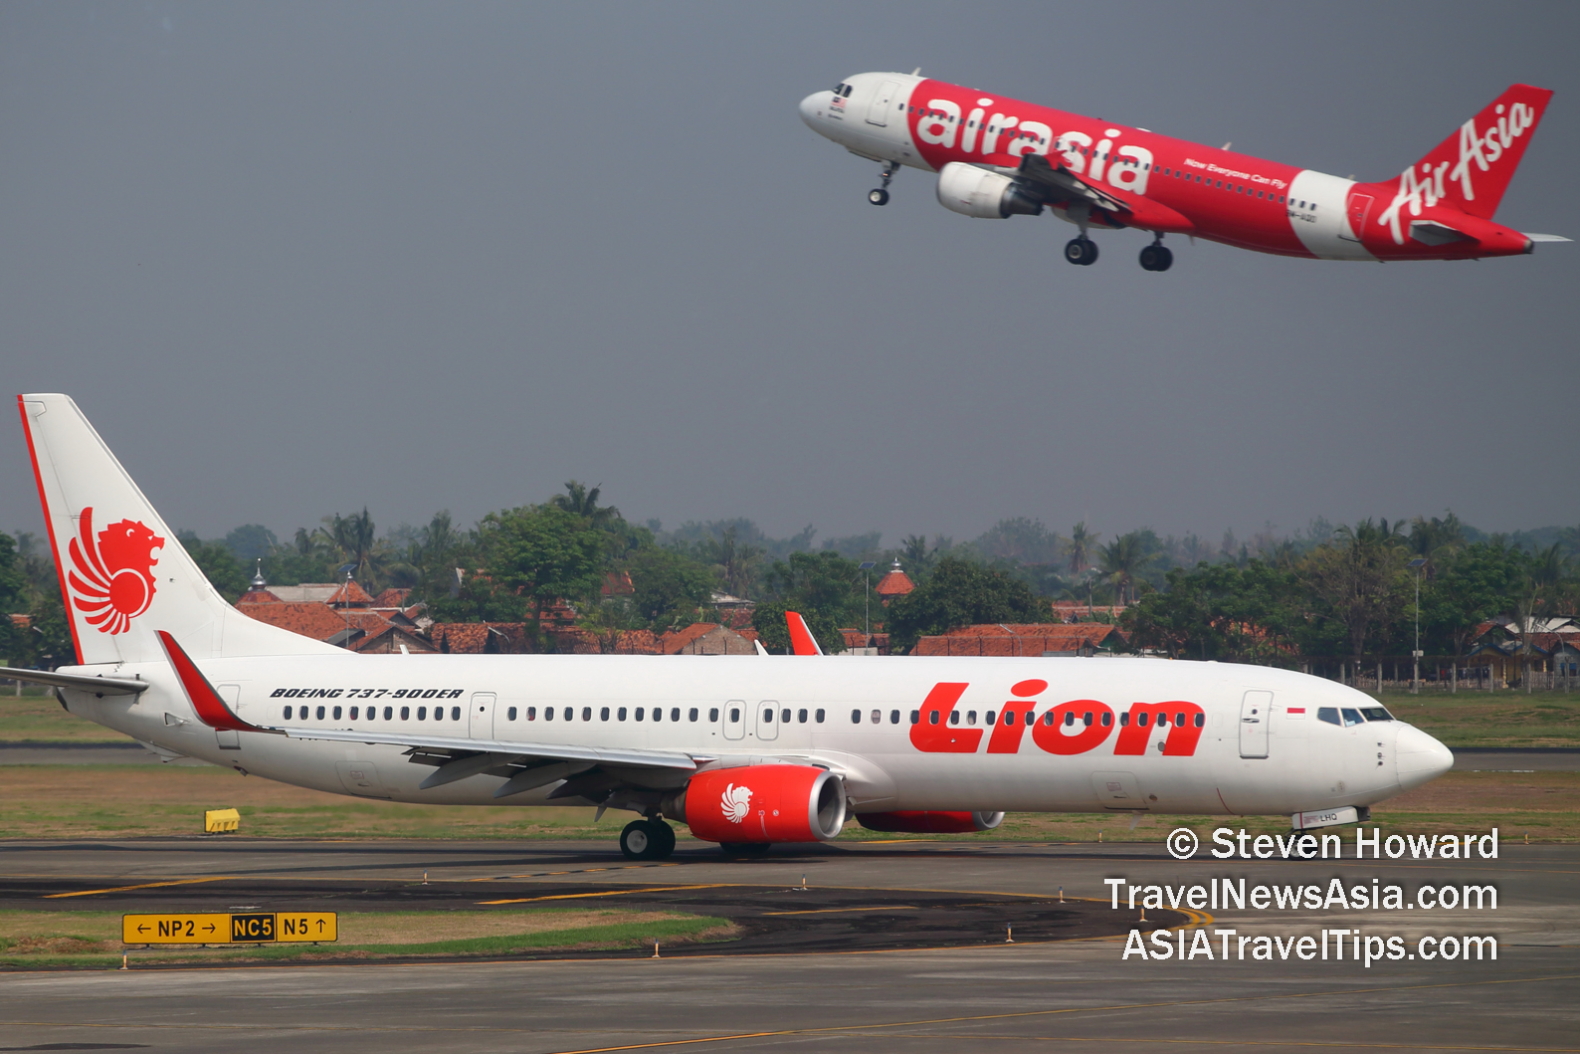 Lion Air and AirAsia aircraft at CGK. Picture by Steven Howard of TravelNewsAsia.com Click to enlarge.